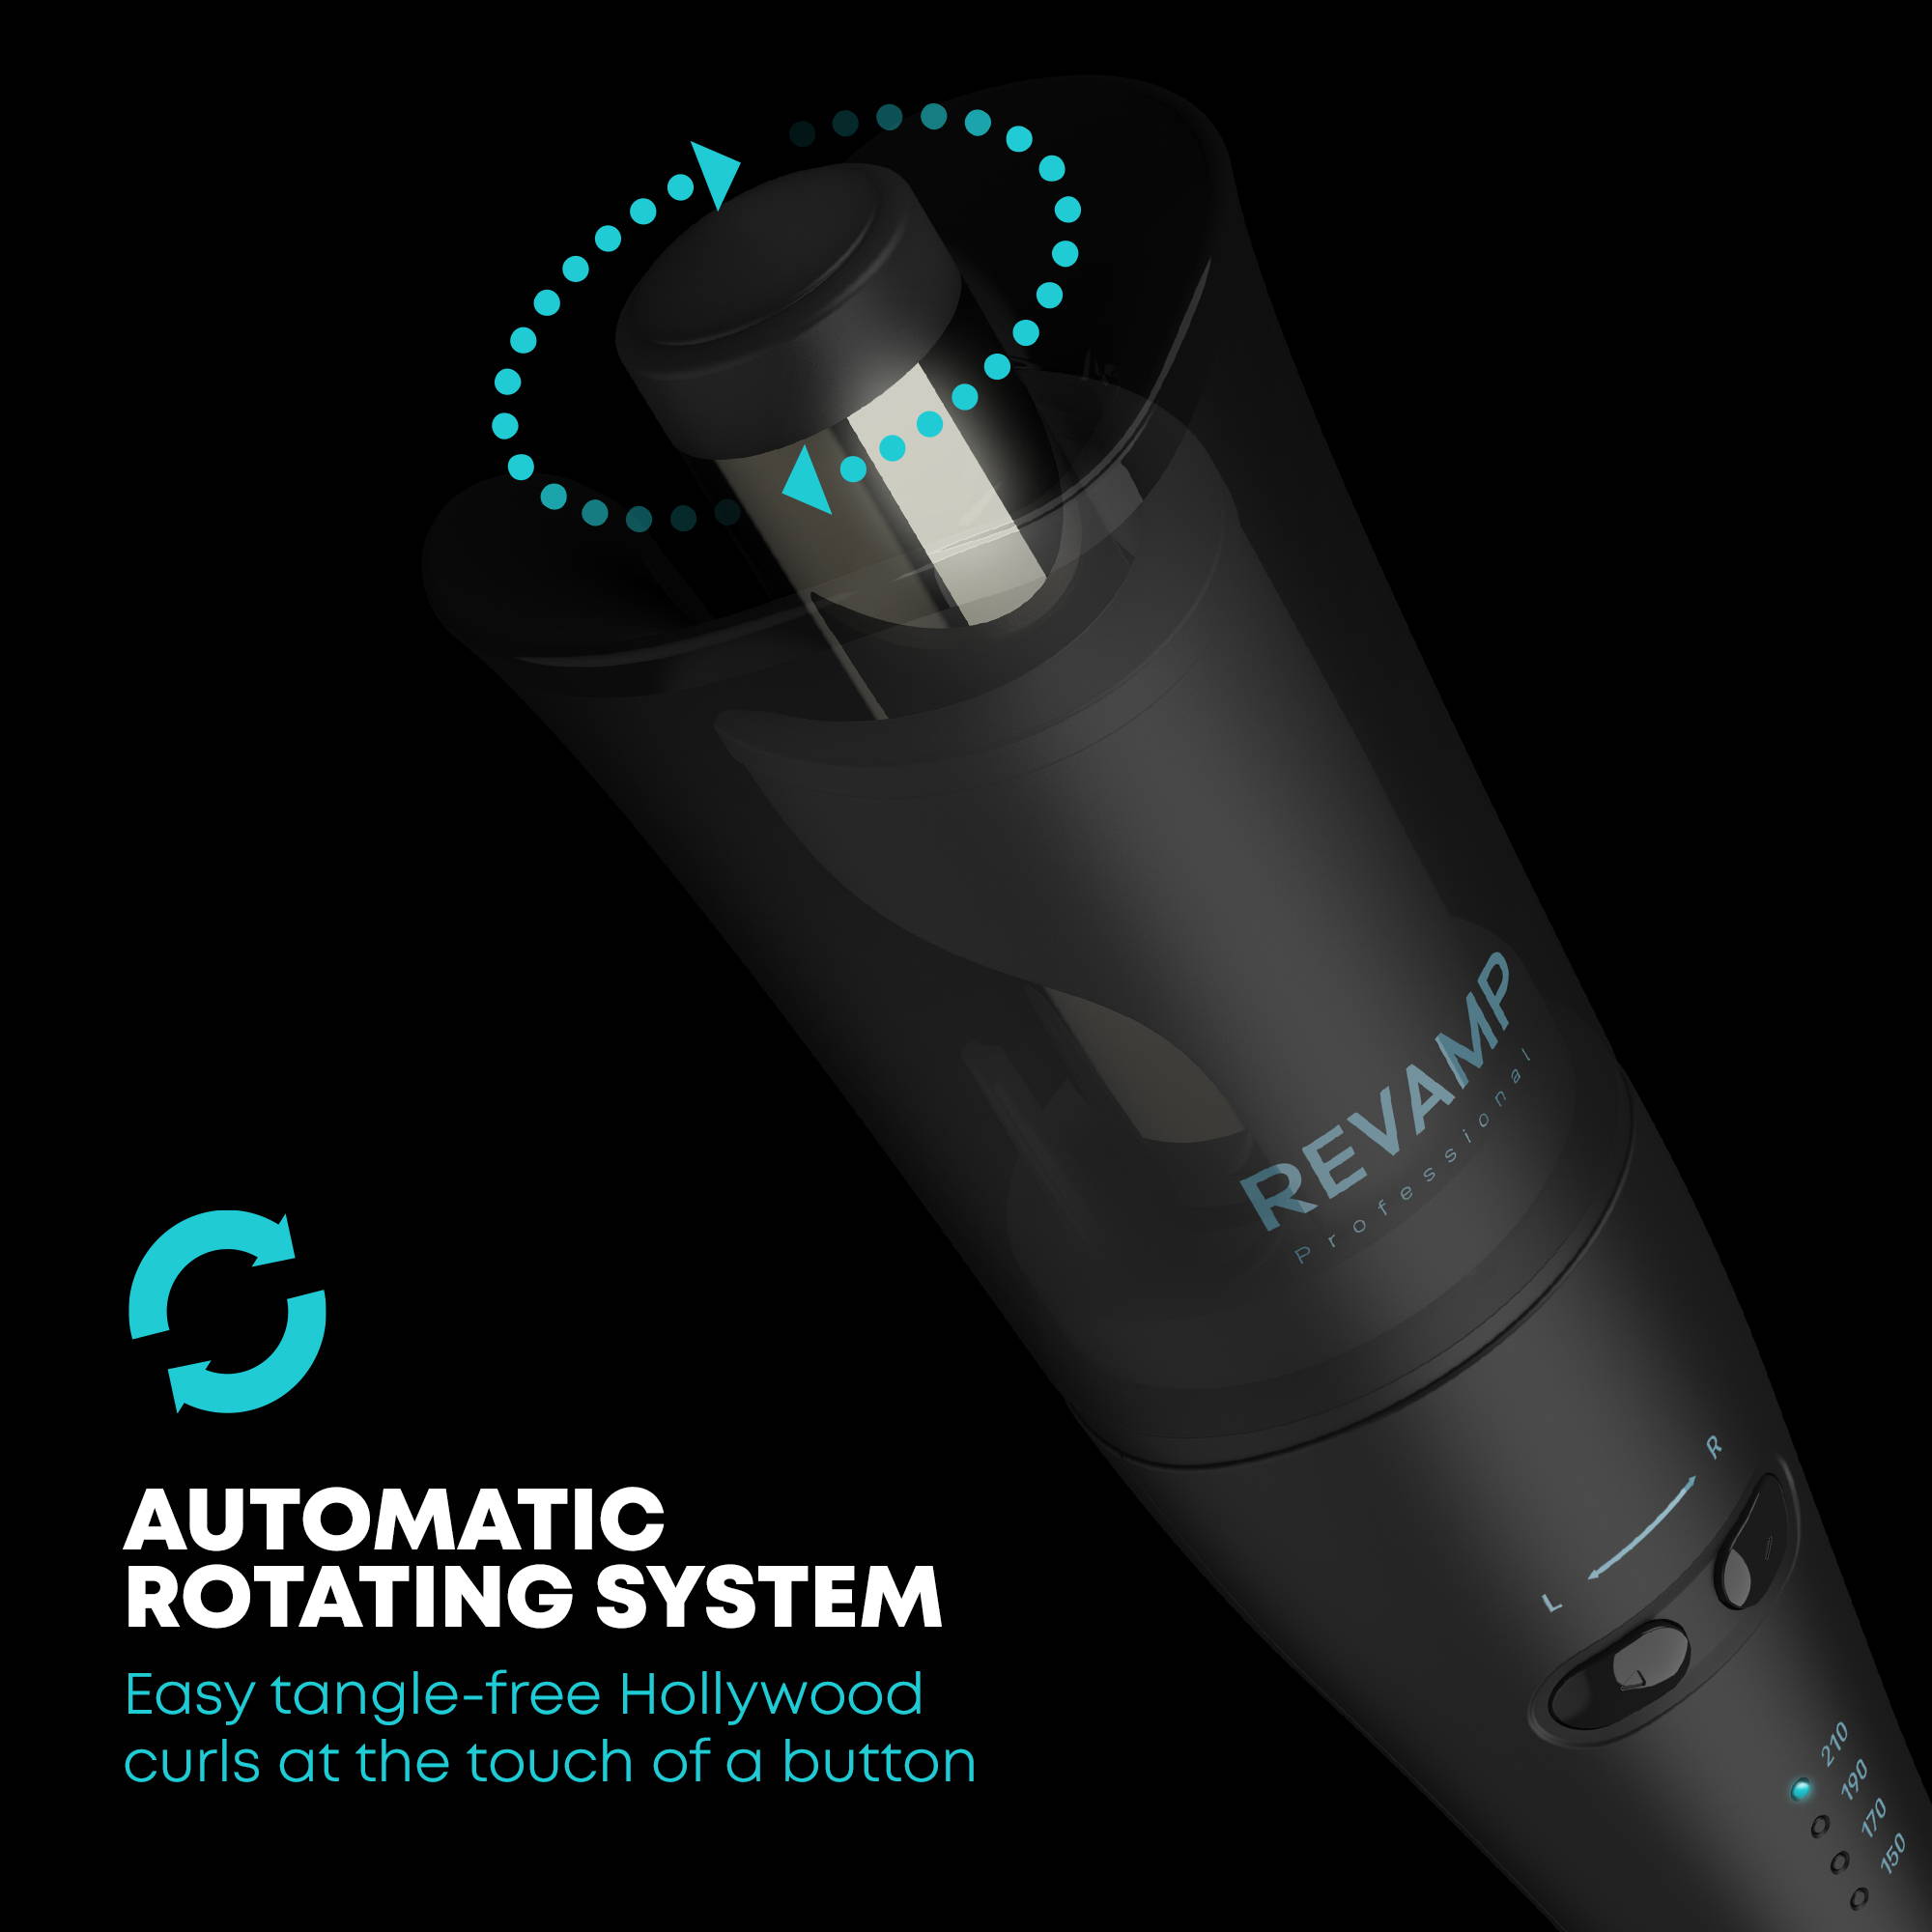 Automatic rotating curling system